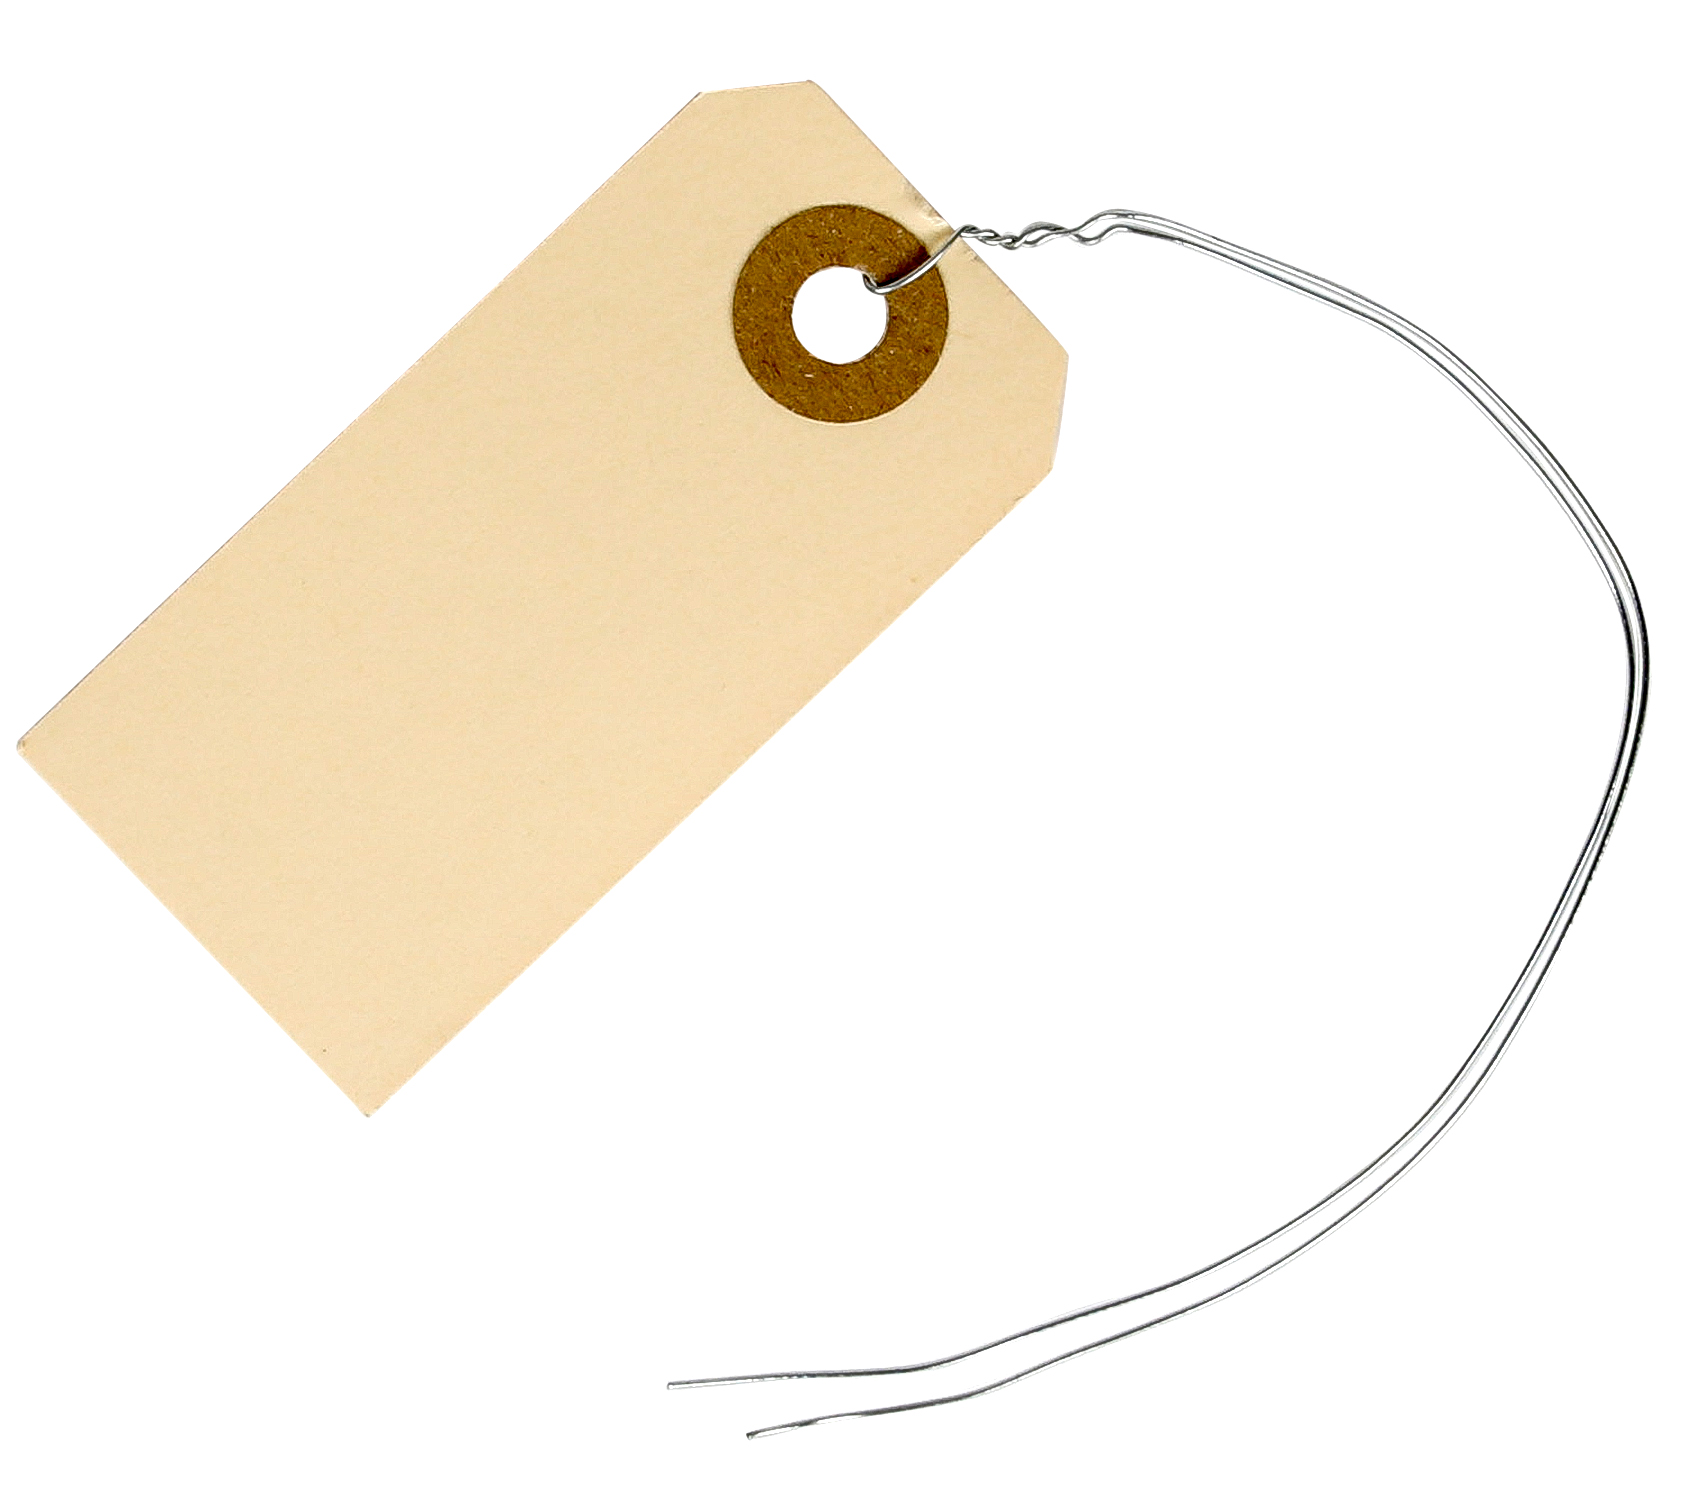 Manila Tags with String Attached - 4 3/4 x 2 3/8 Box of 100